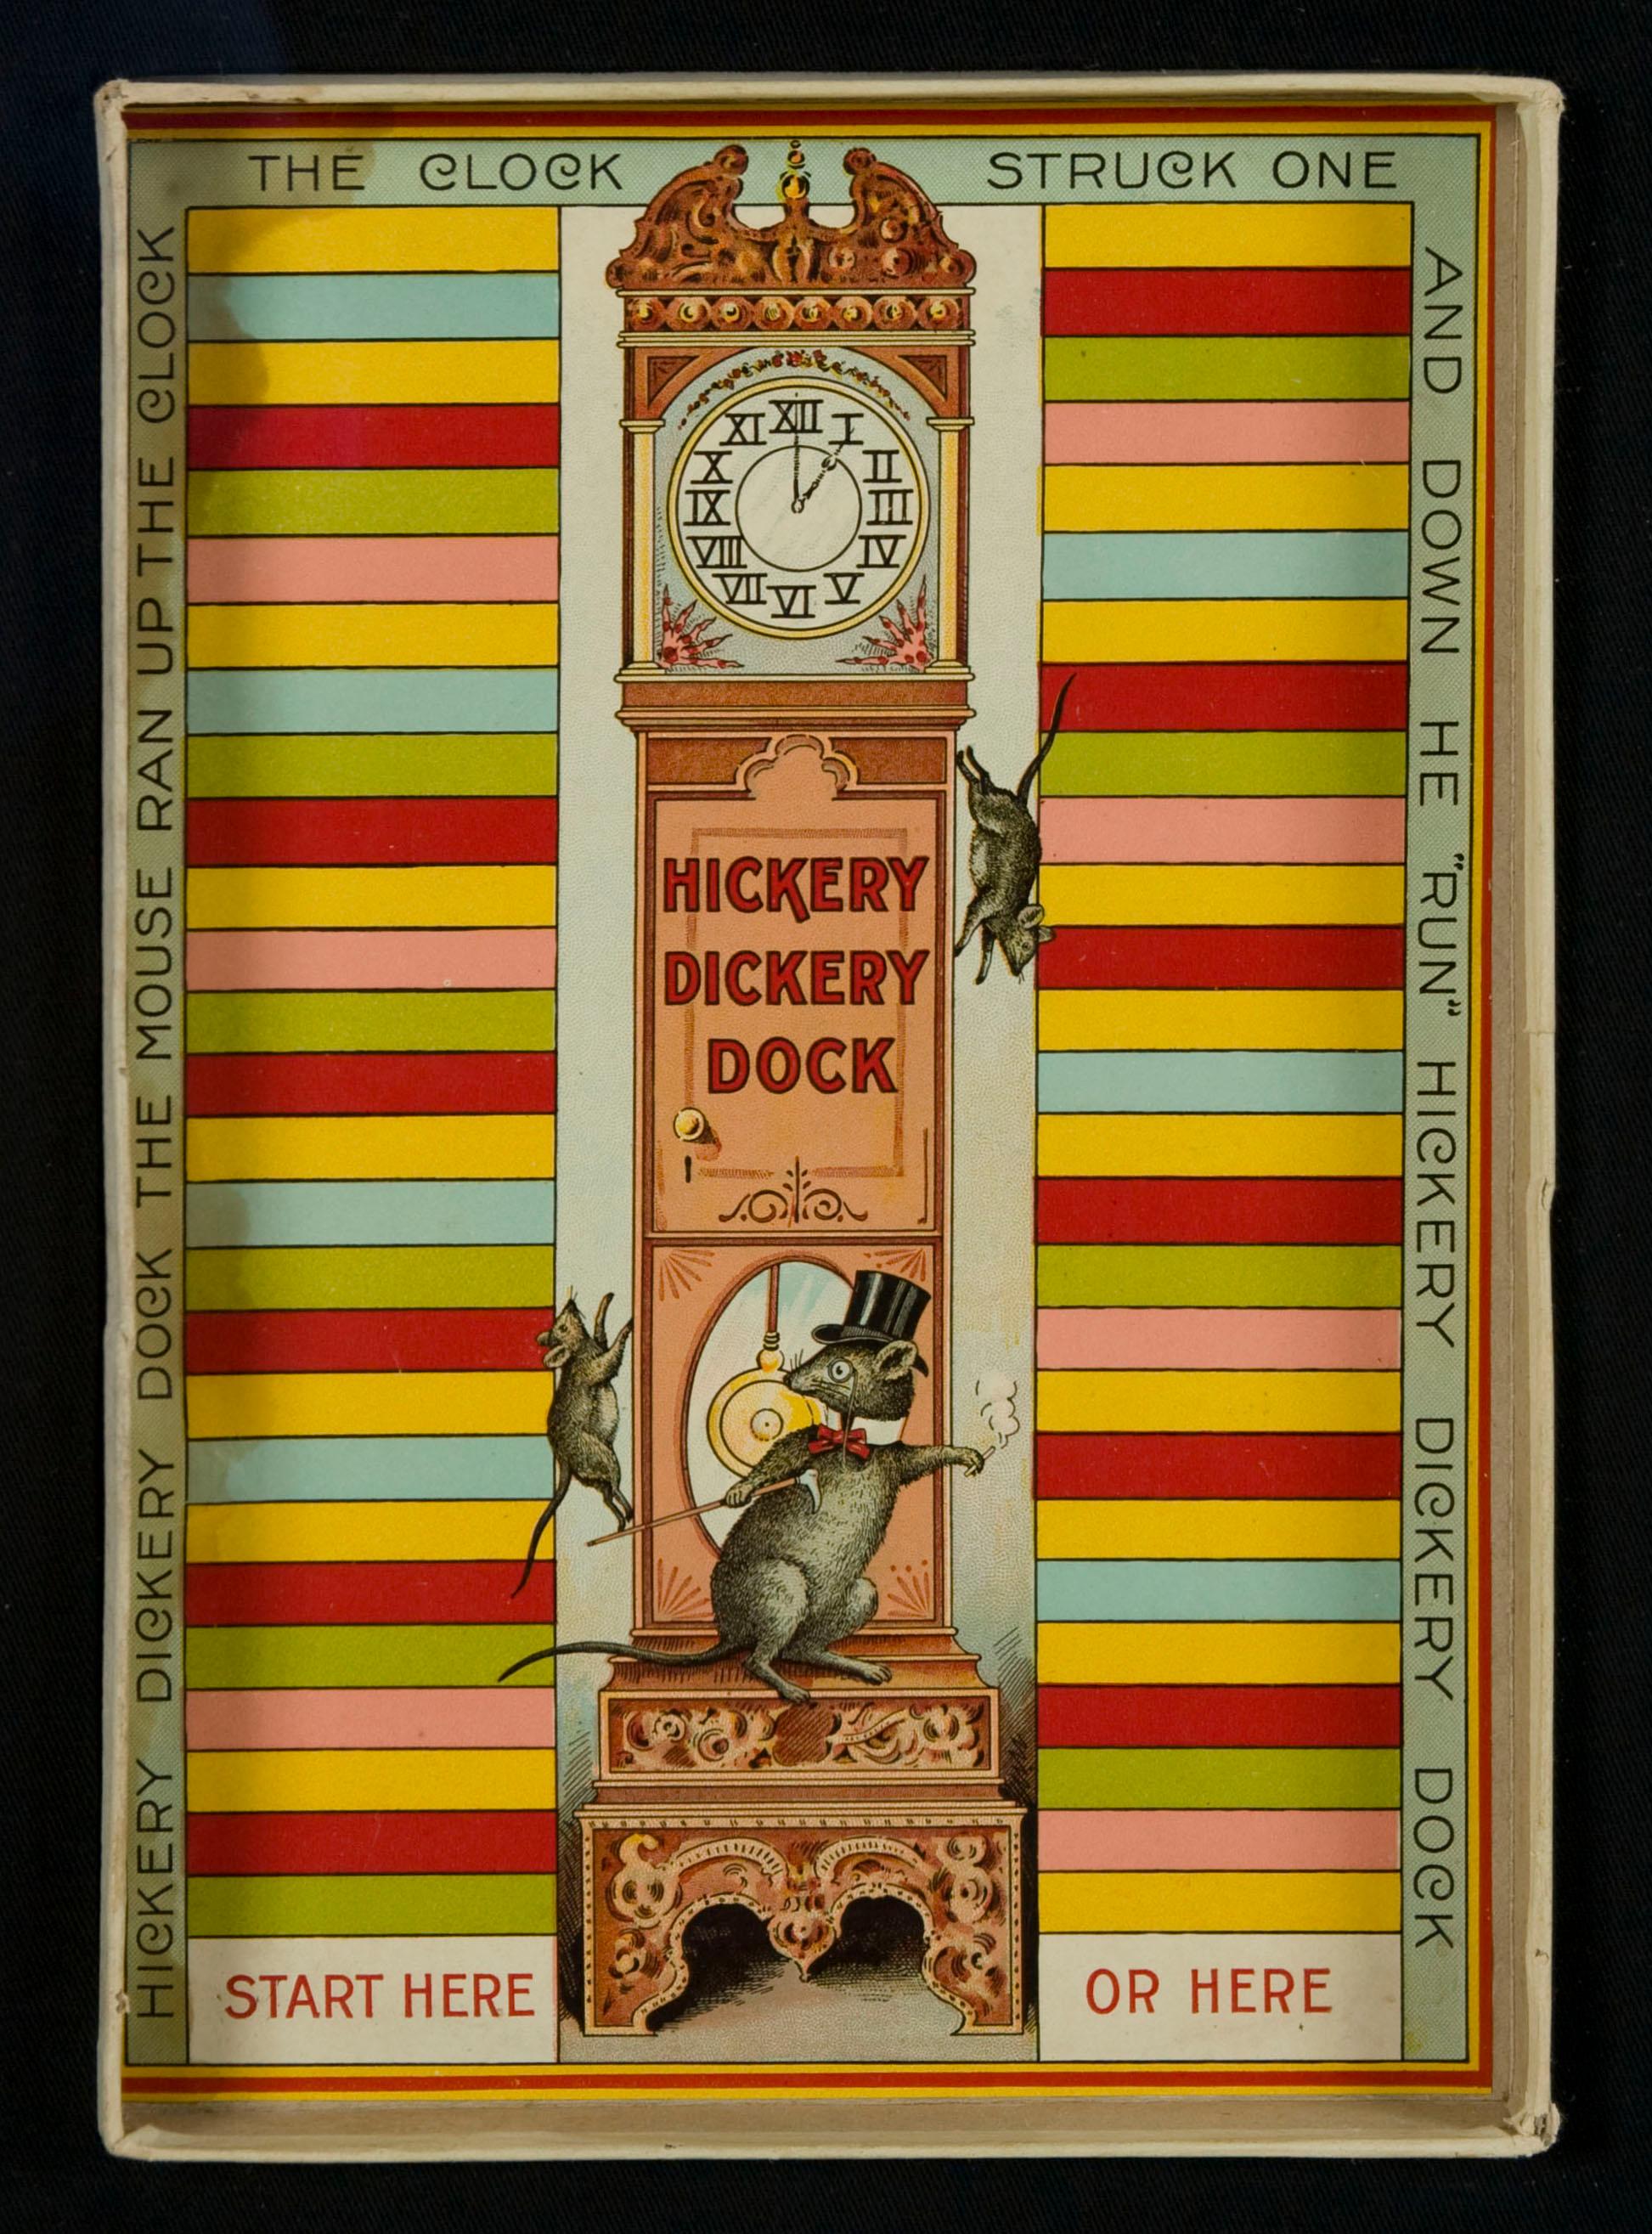 Hickory Dickery dock: Early Parker Brothers board game with great cat & mouse and tall case clock graphics, 1900.

Patented in 1899 and produced in 1900, this colorful Parker Brothers board game has excellent and desirable graphics that includes a